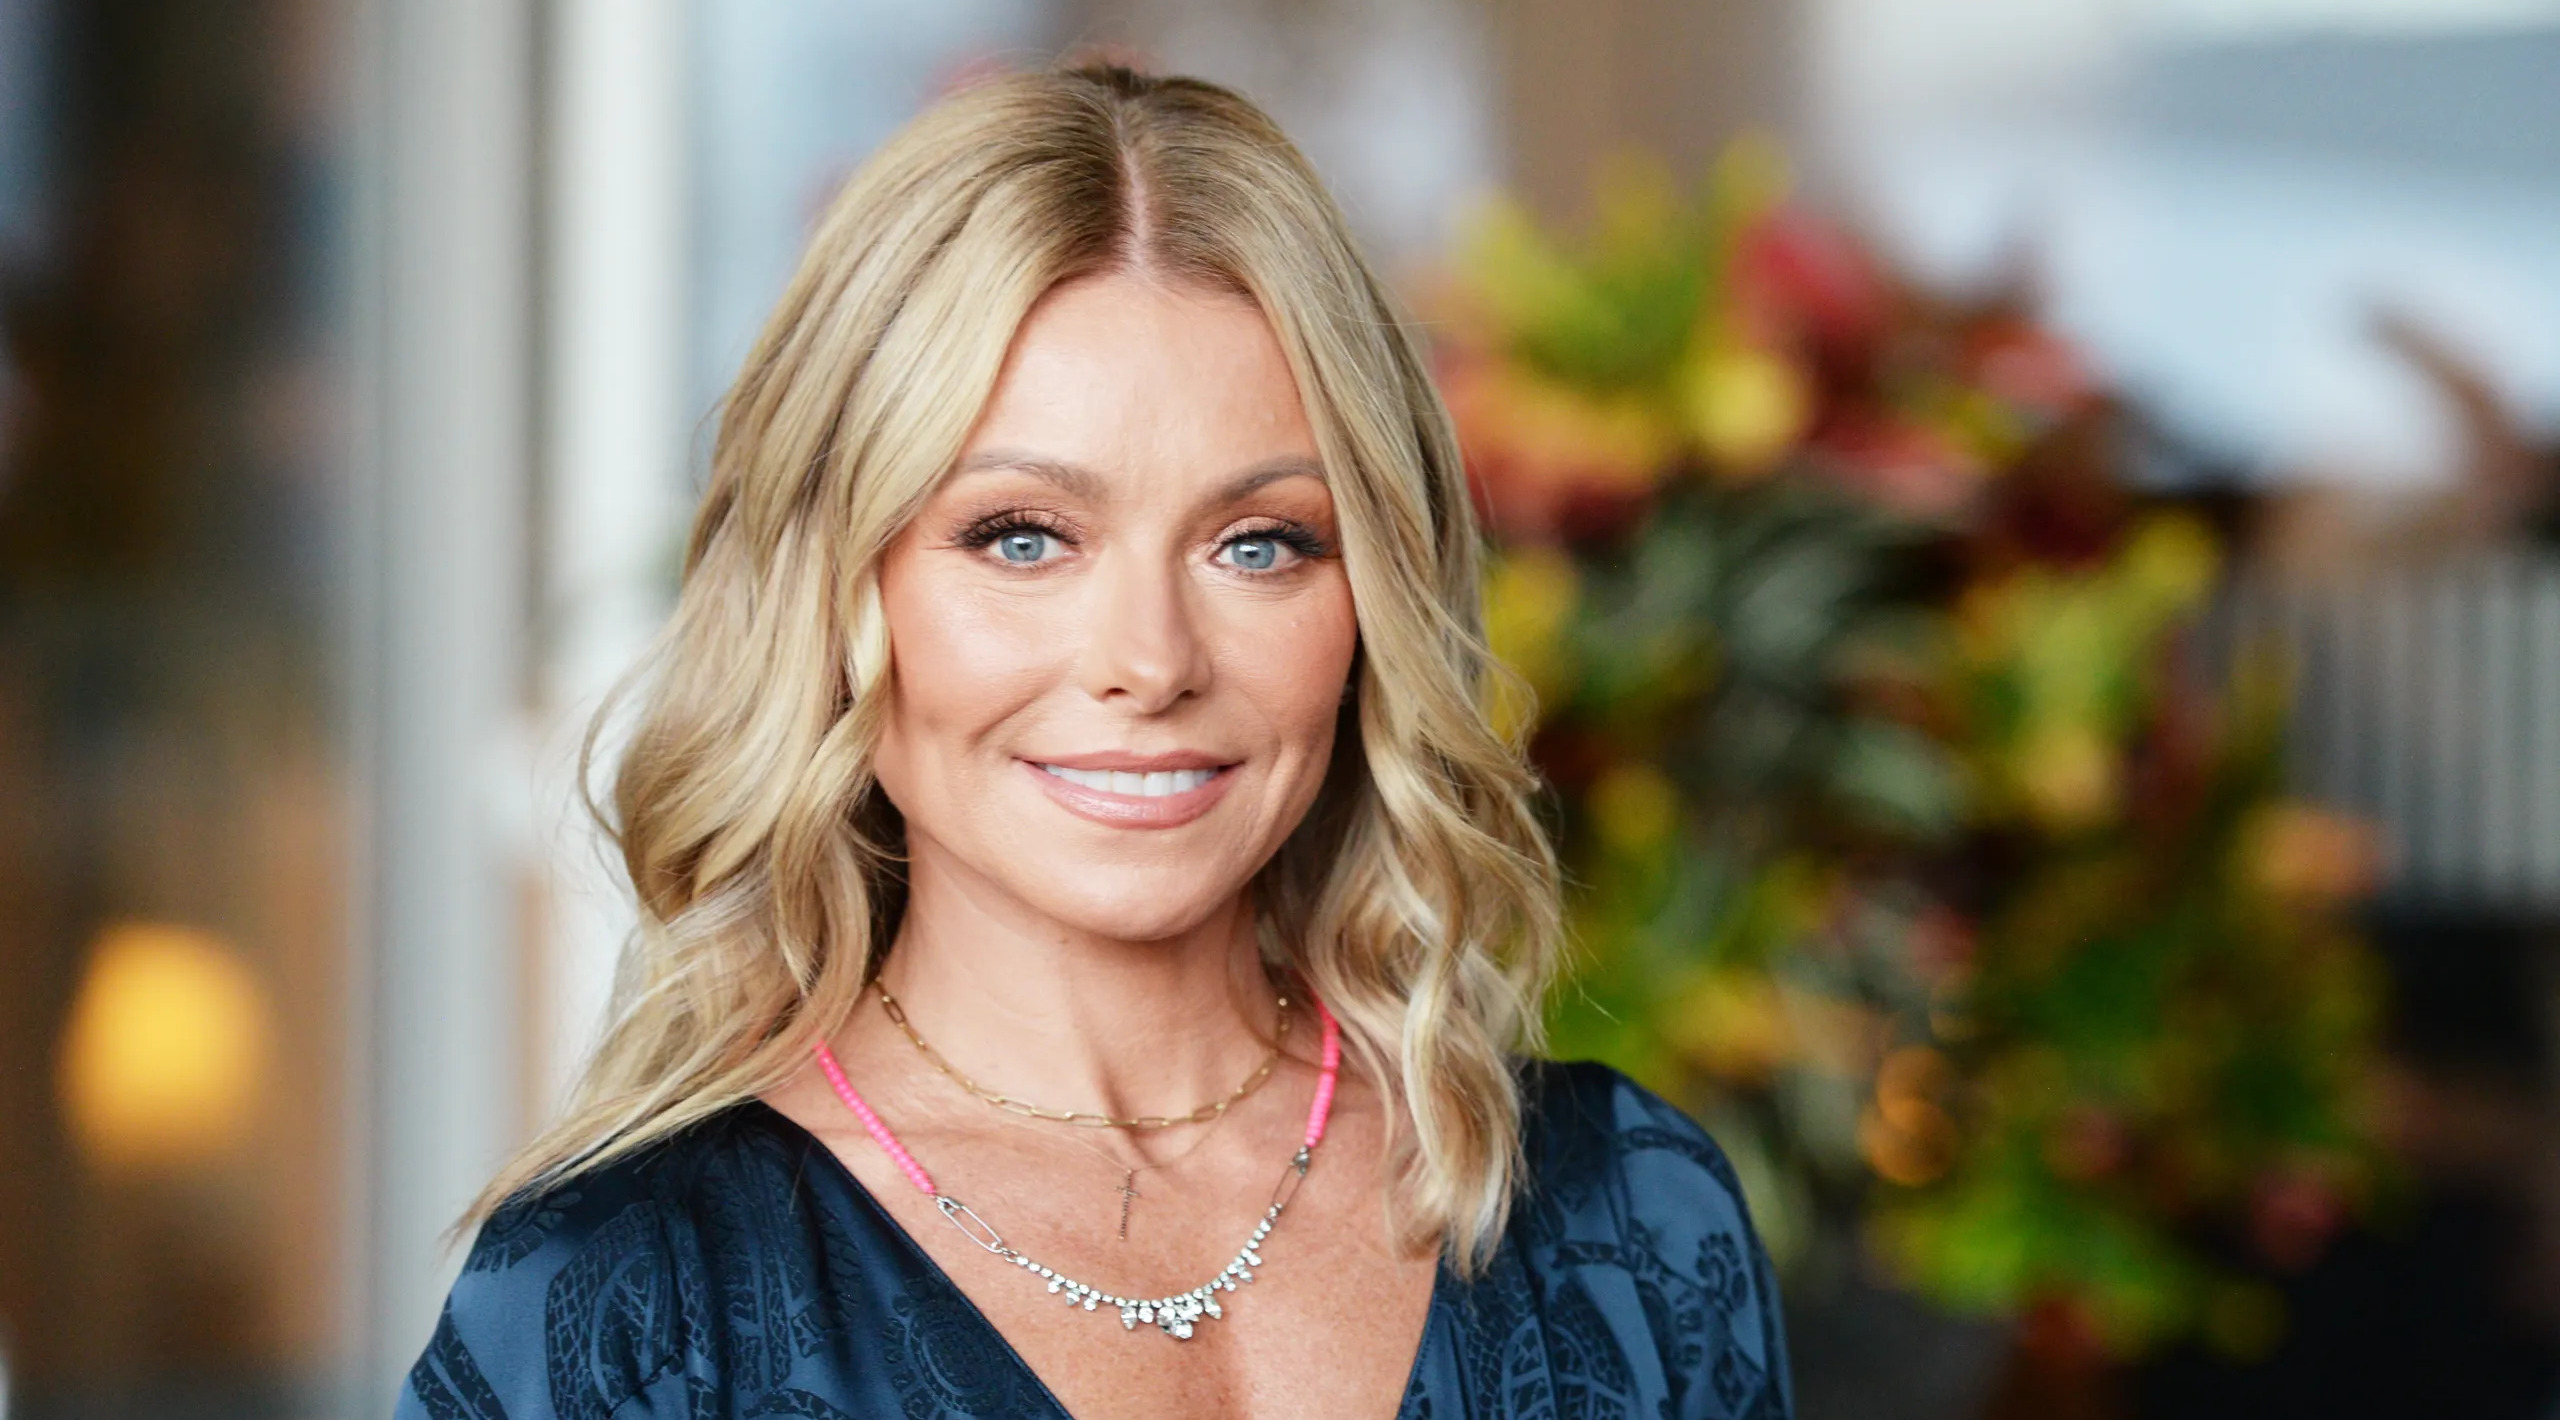 48 Facts about Kelly Ripa - Facts.net